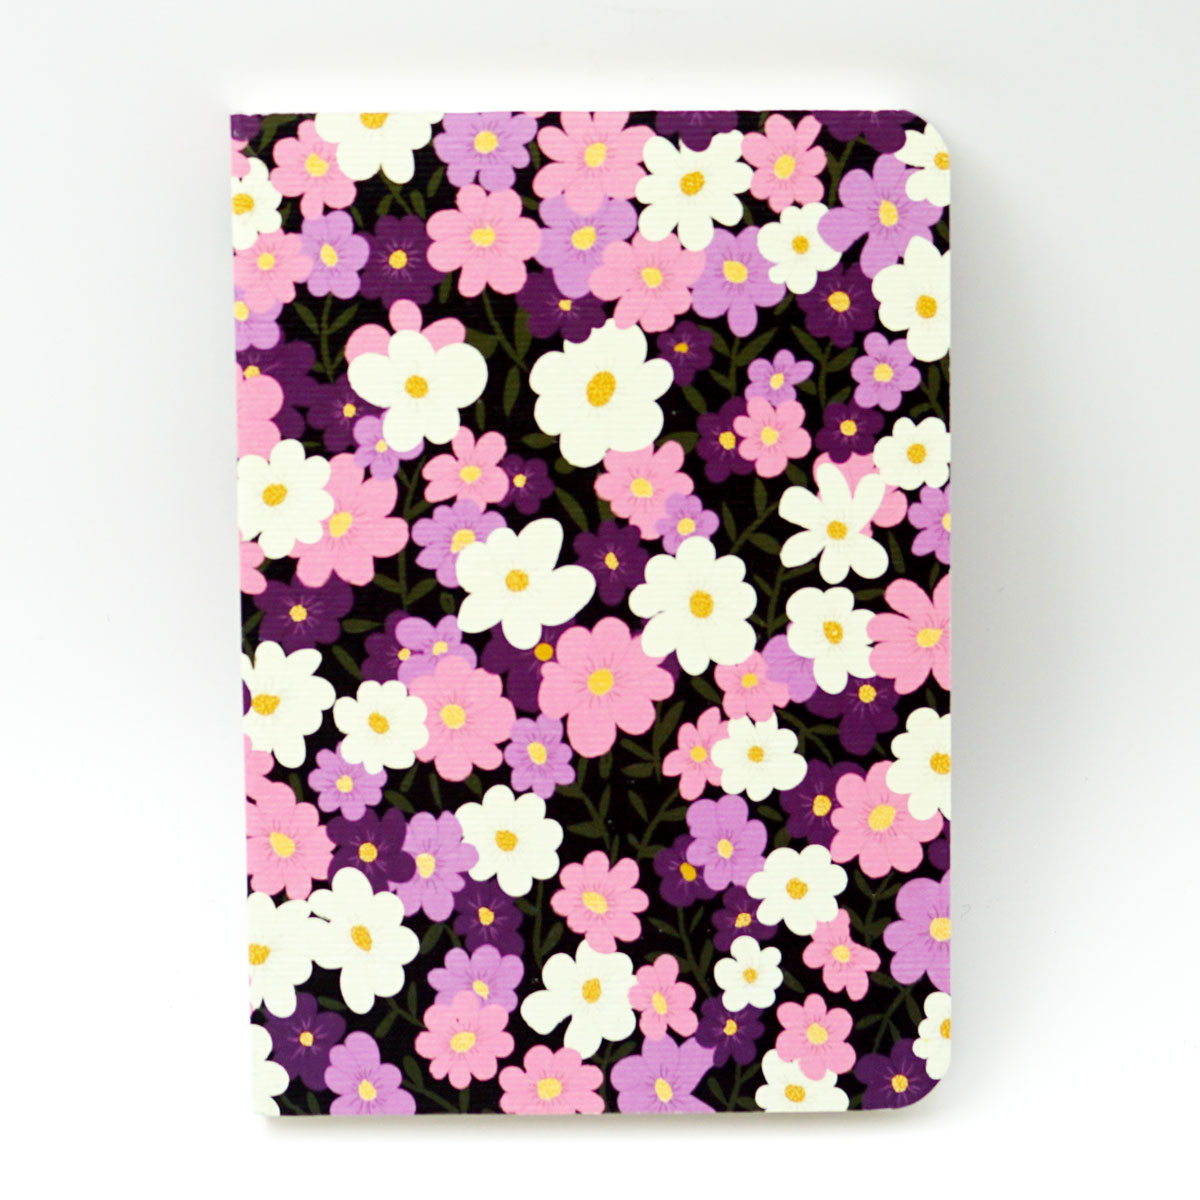 Factor A6 Black Color with Flower Design Soft Bound Ruled Notebook 100 GSM With 144 Pages SKU 50214